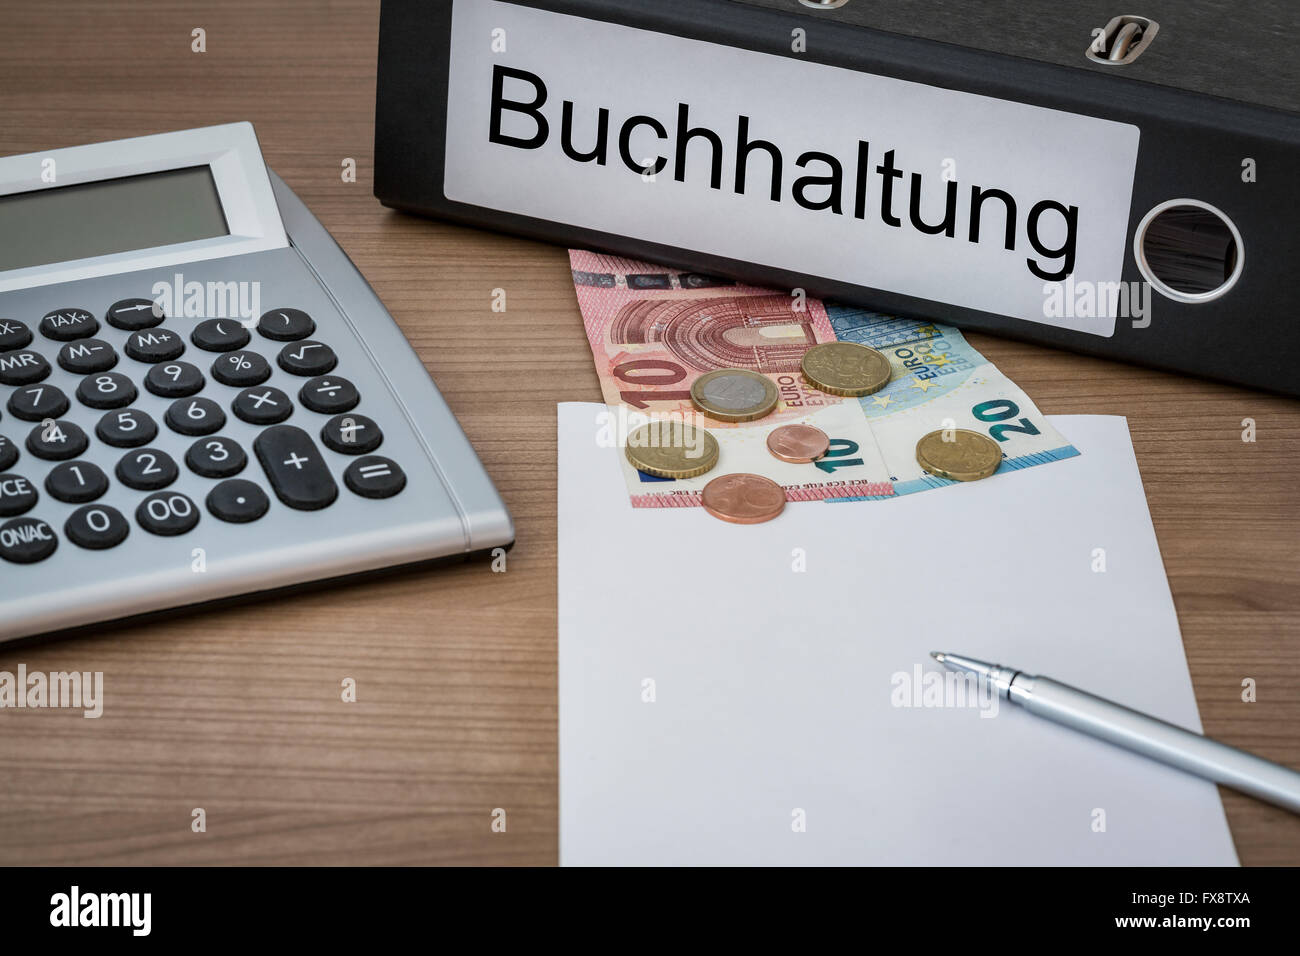 Buchhaltung (German Accounting) written on a binder on a desk with euro money calculator blank sheet and pen Stock Photo